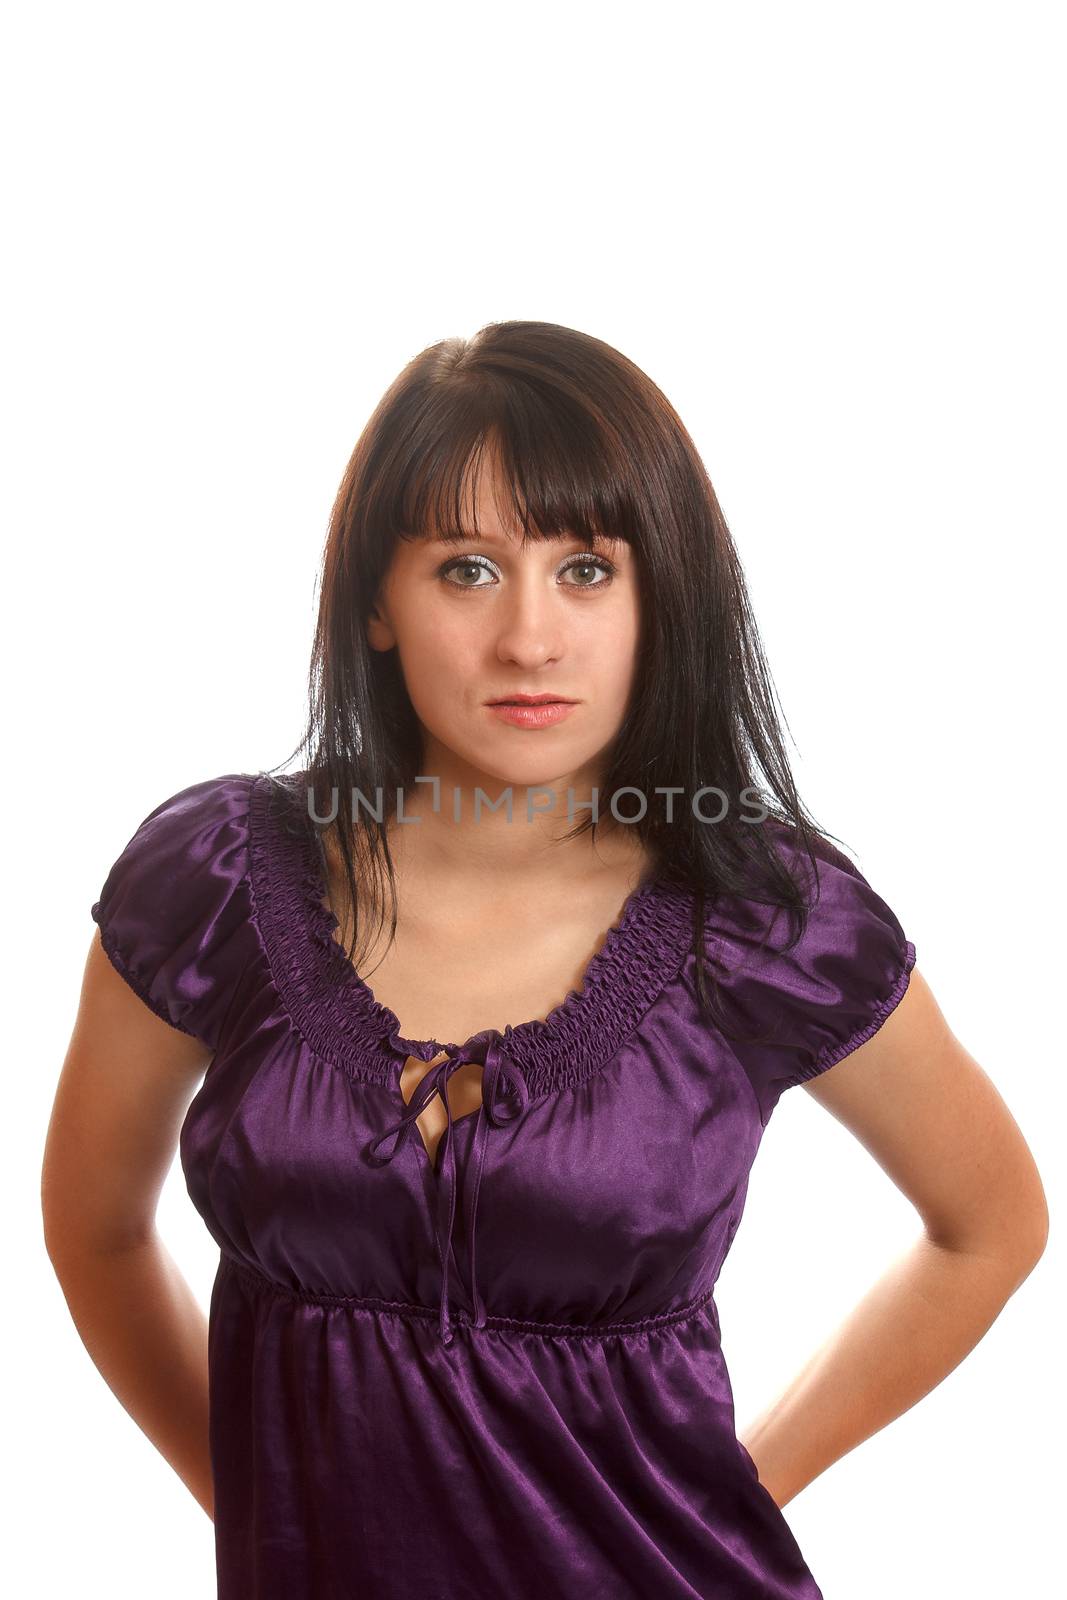 An brown haired female adult wearing a purple dress